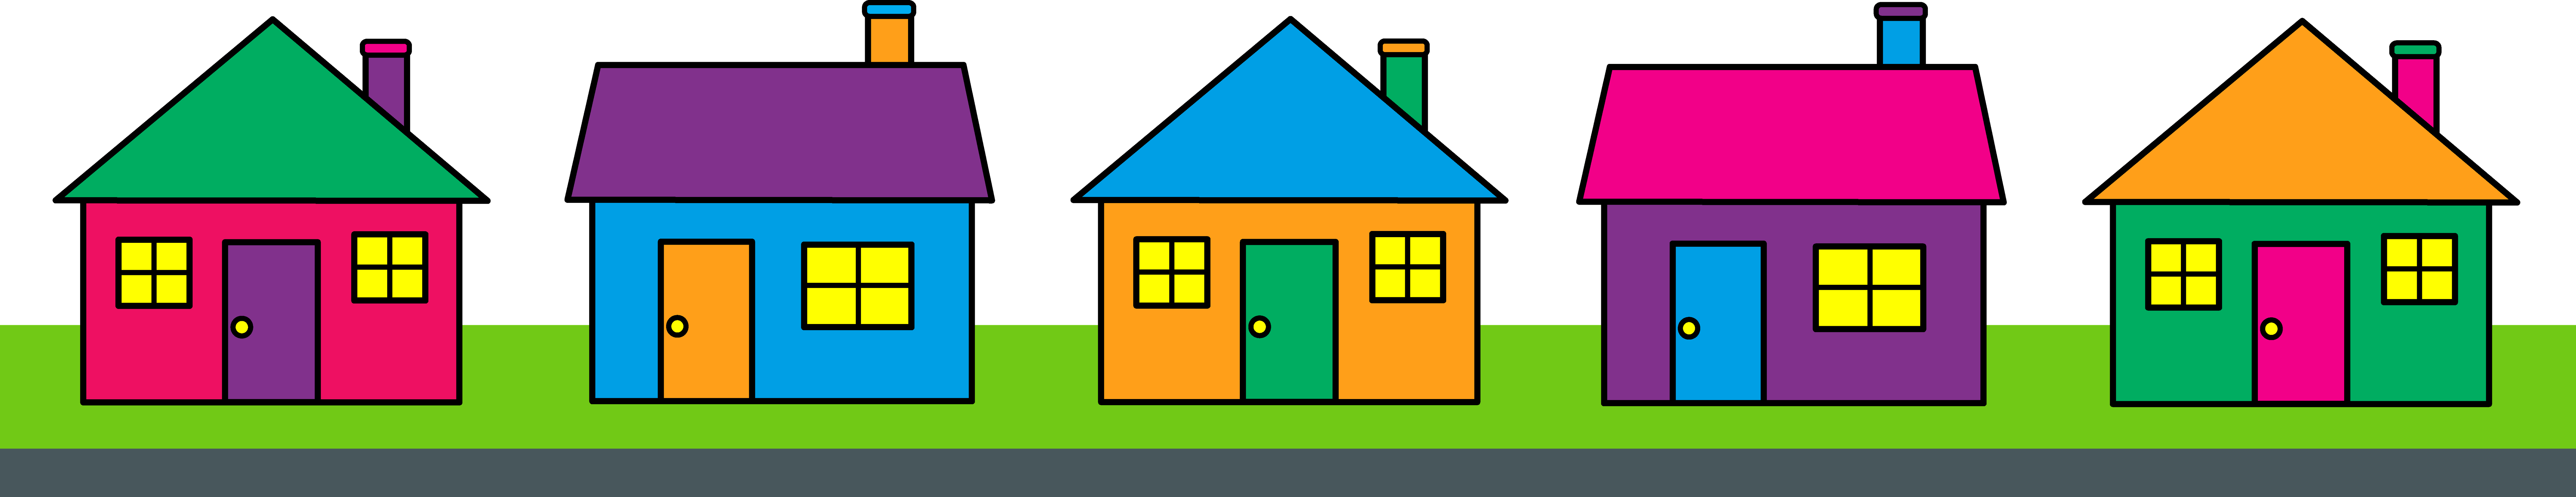 Drawing a House 1 | ClipArt ETC | House colouring pages, Simple house  drawing, Easy drawings